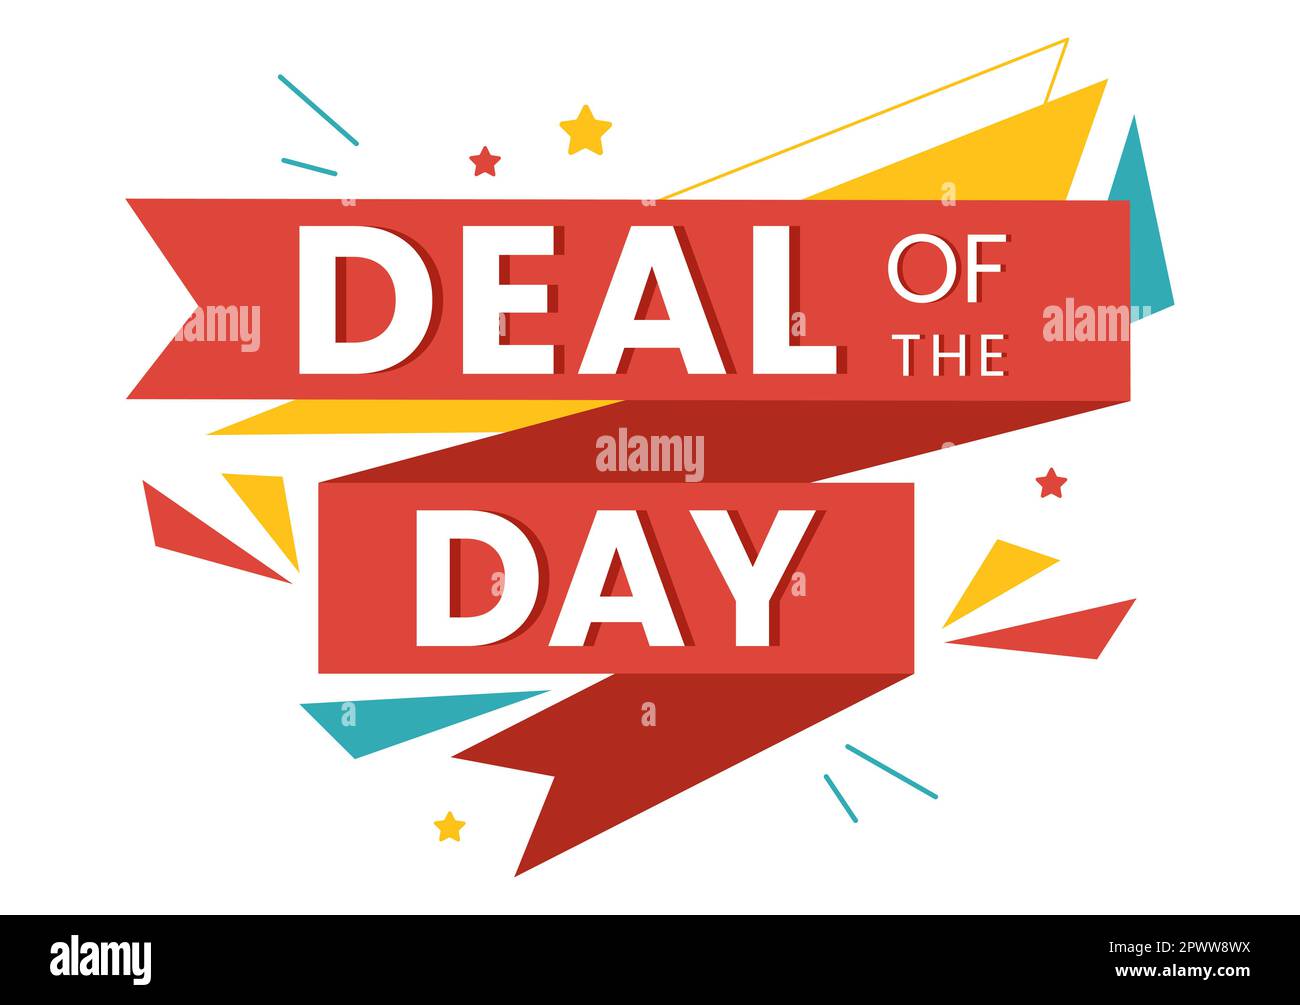 https://c8.alamy.com/comp/2PWW8WX/daily-deals-of-the-day-with-decorative-lettering-text-style-for-poster-or-label-in-flat-cartoon-hand-drawn-background-templates-illustration-2PWW8WX.jpg